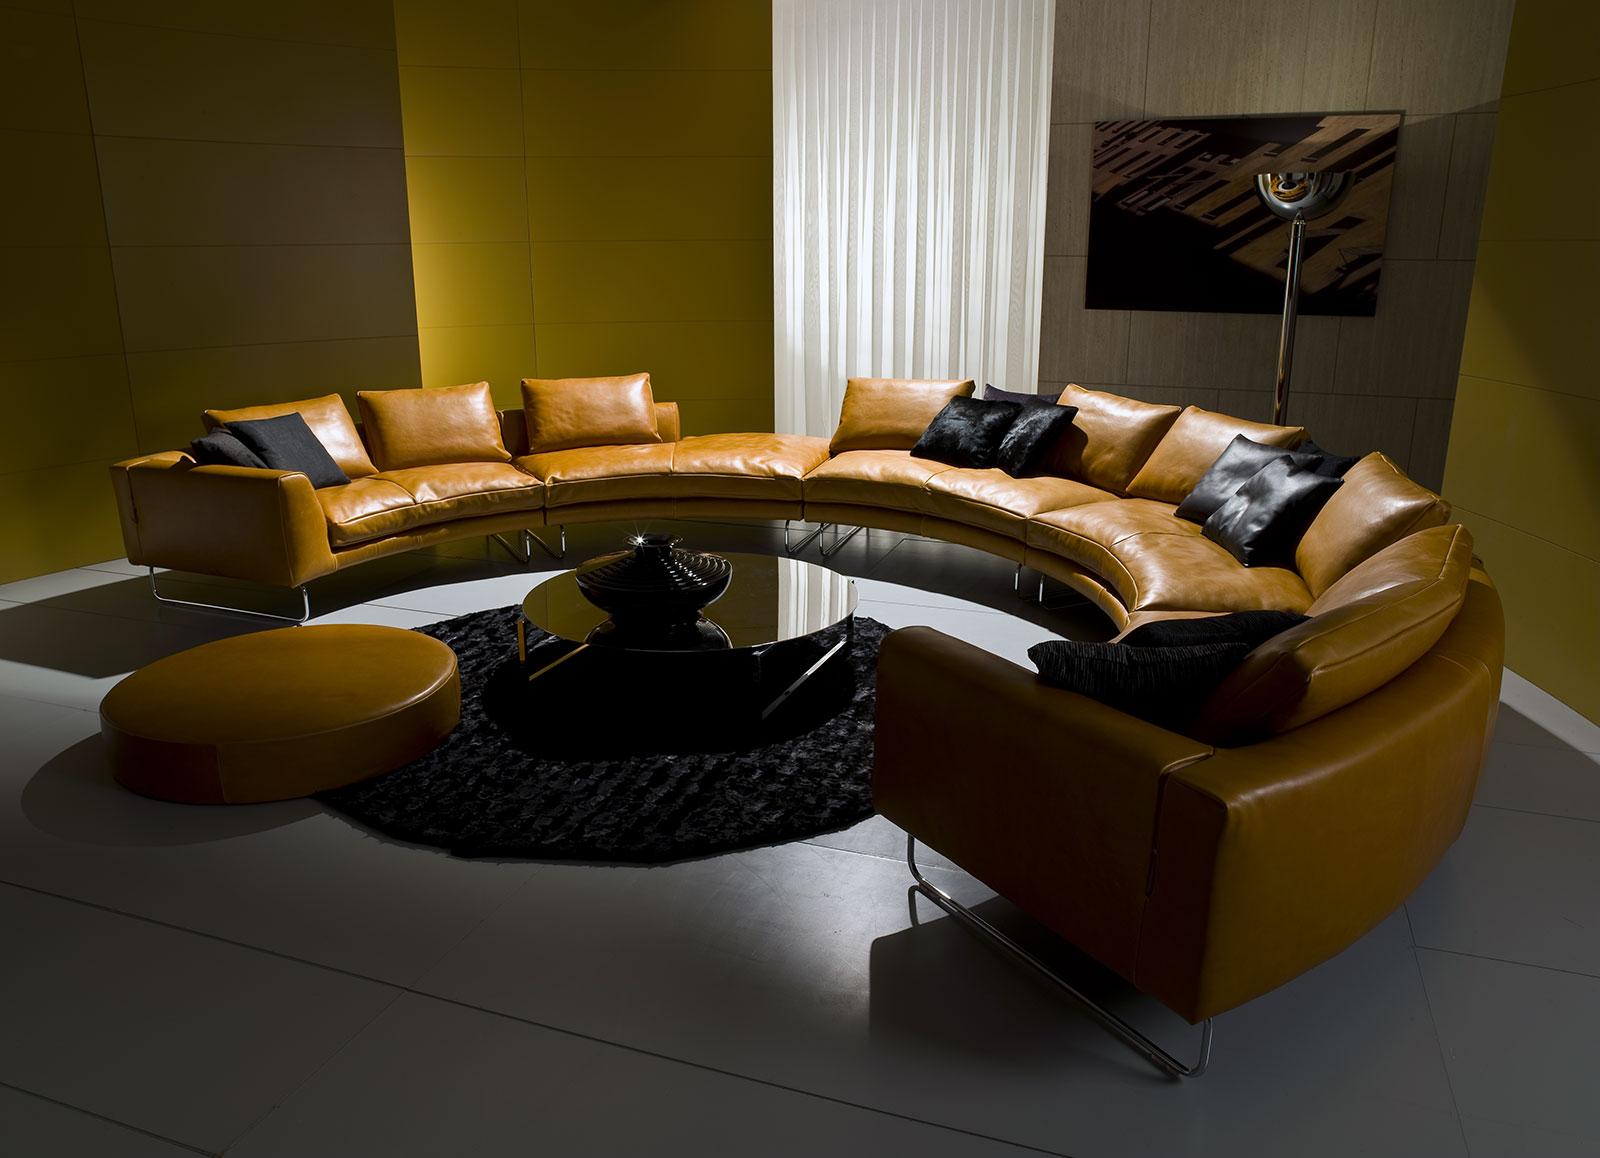 Add-Look Round is a luxurious sofa designed by Mauro Lipparini. This round leather sofa with solid wood frame, goose feathers padding and leather covering is perfect for any room.